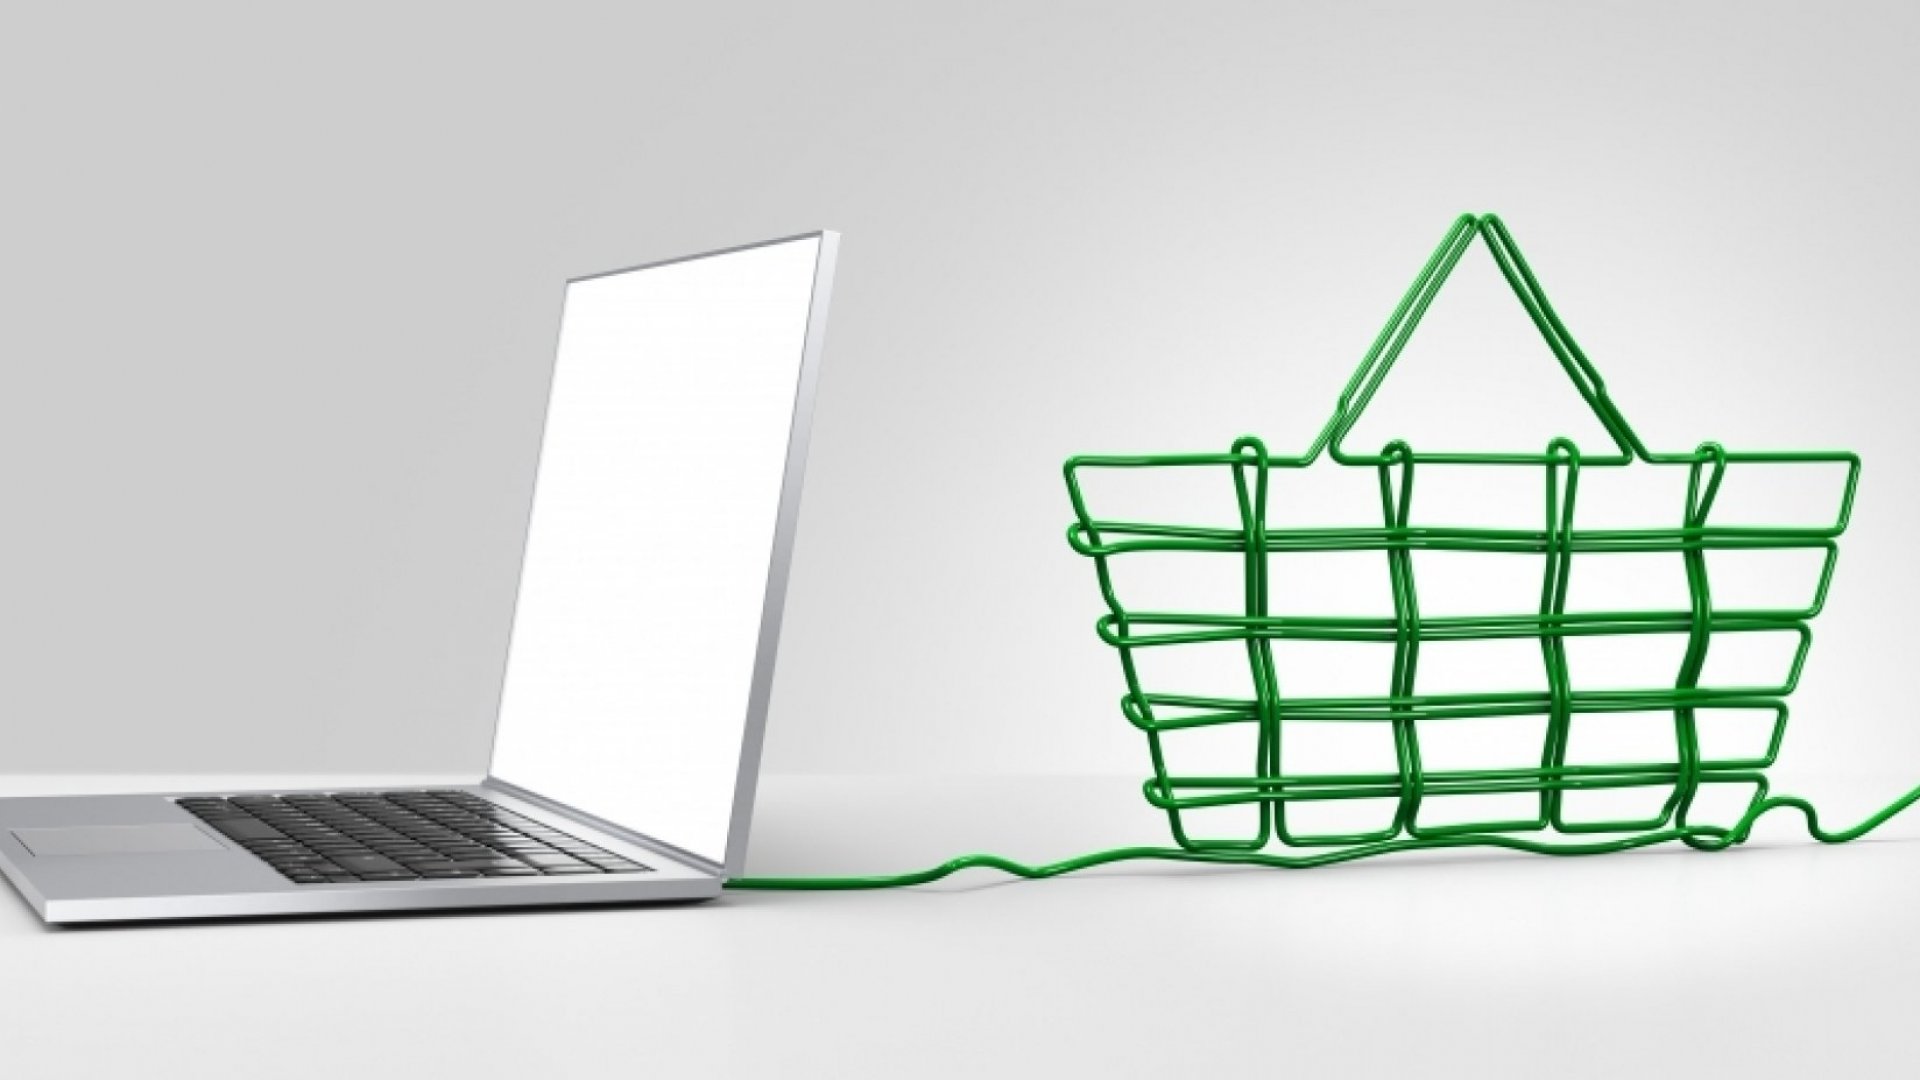 Will the sudden collapse of leading e-commerce companies bring about the effect of 